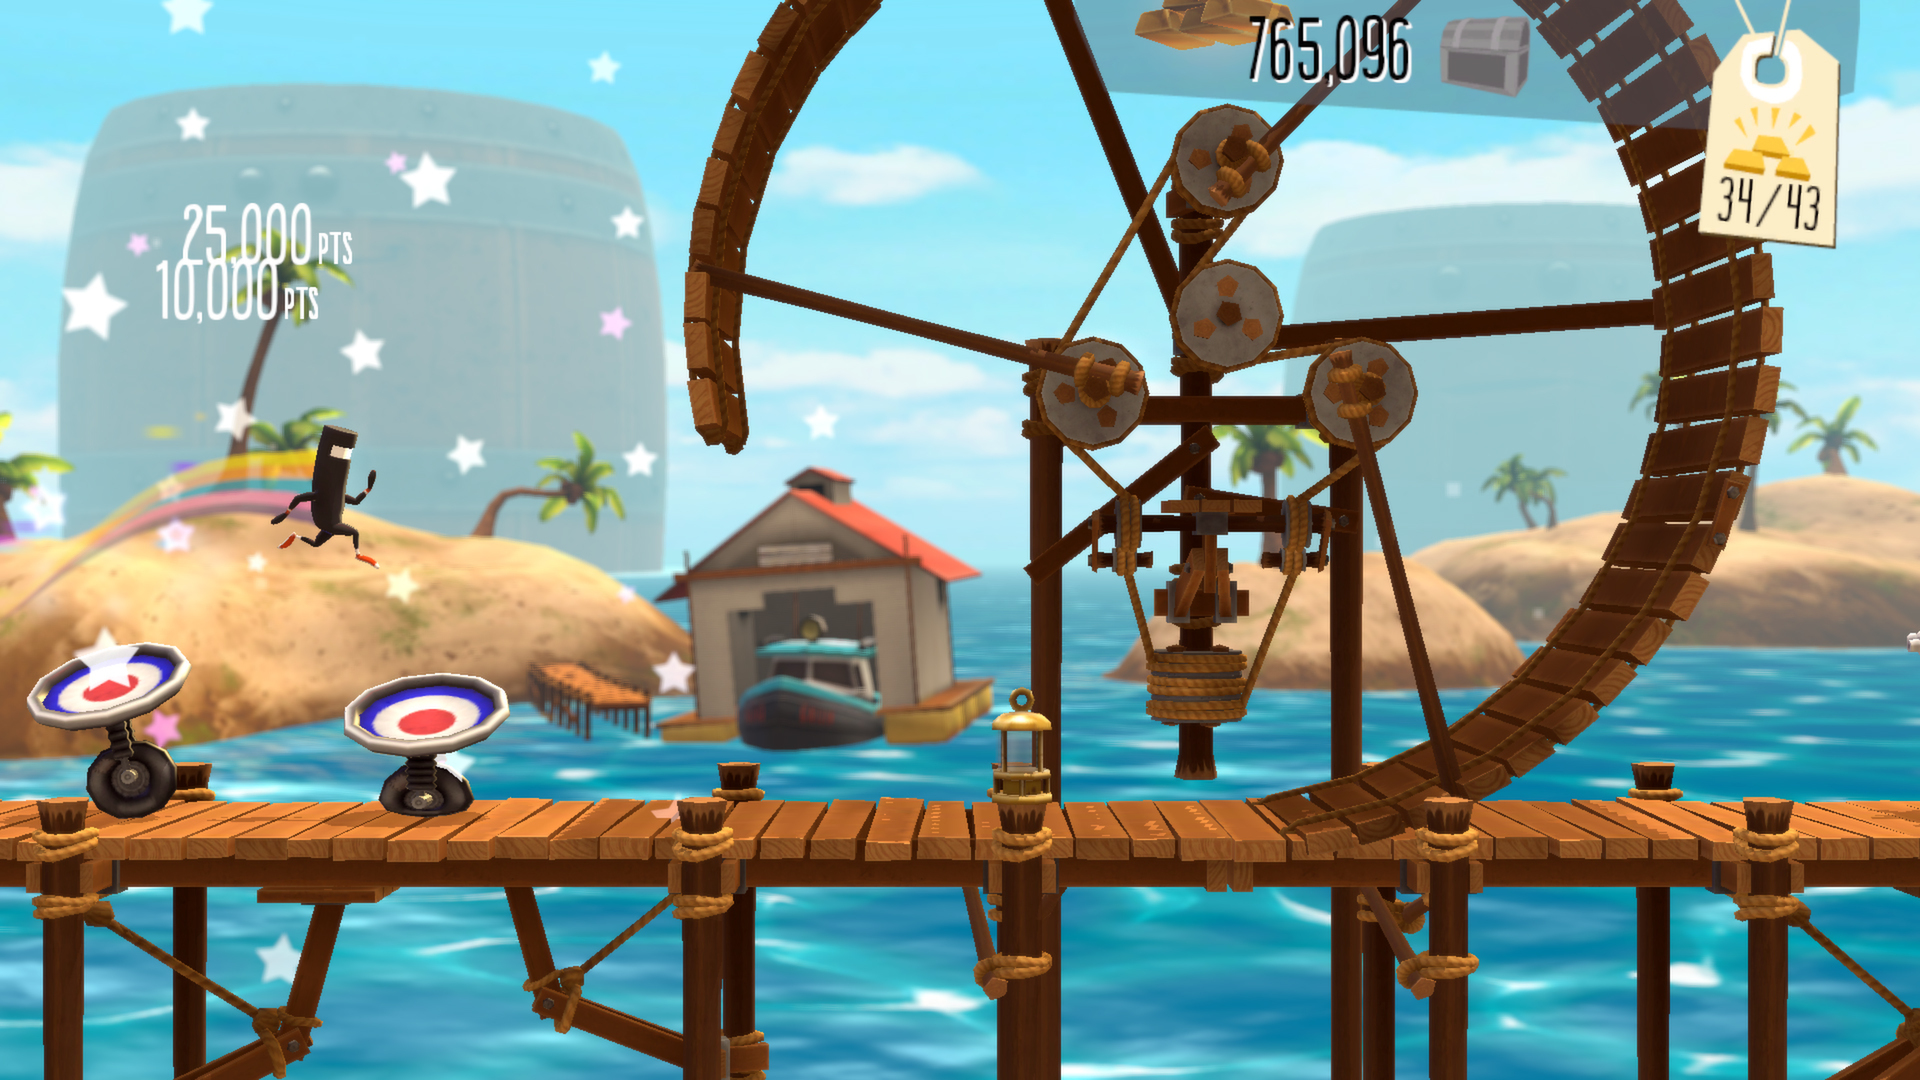 Runner2 Runs to the Beat on Switch Today